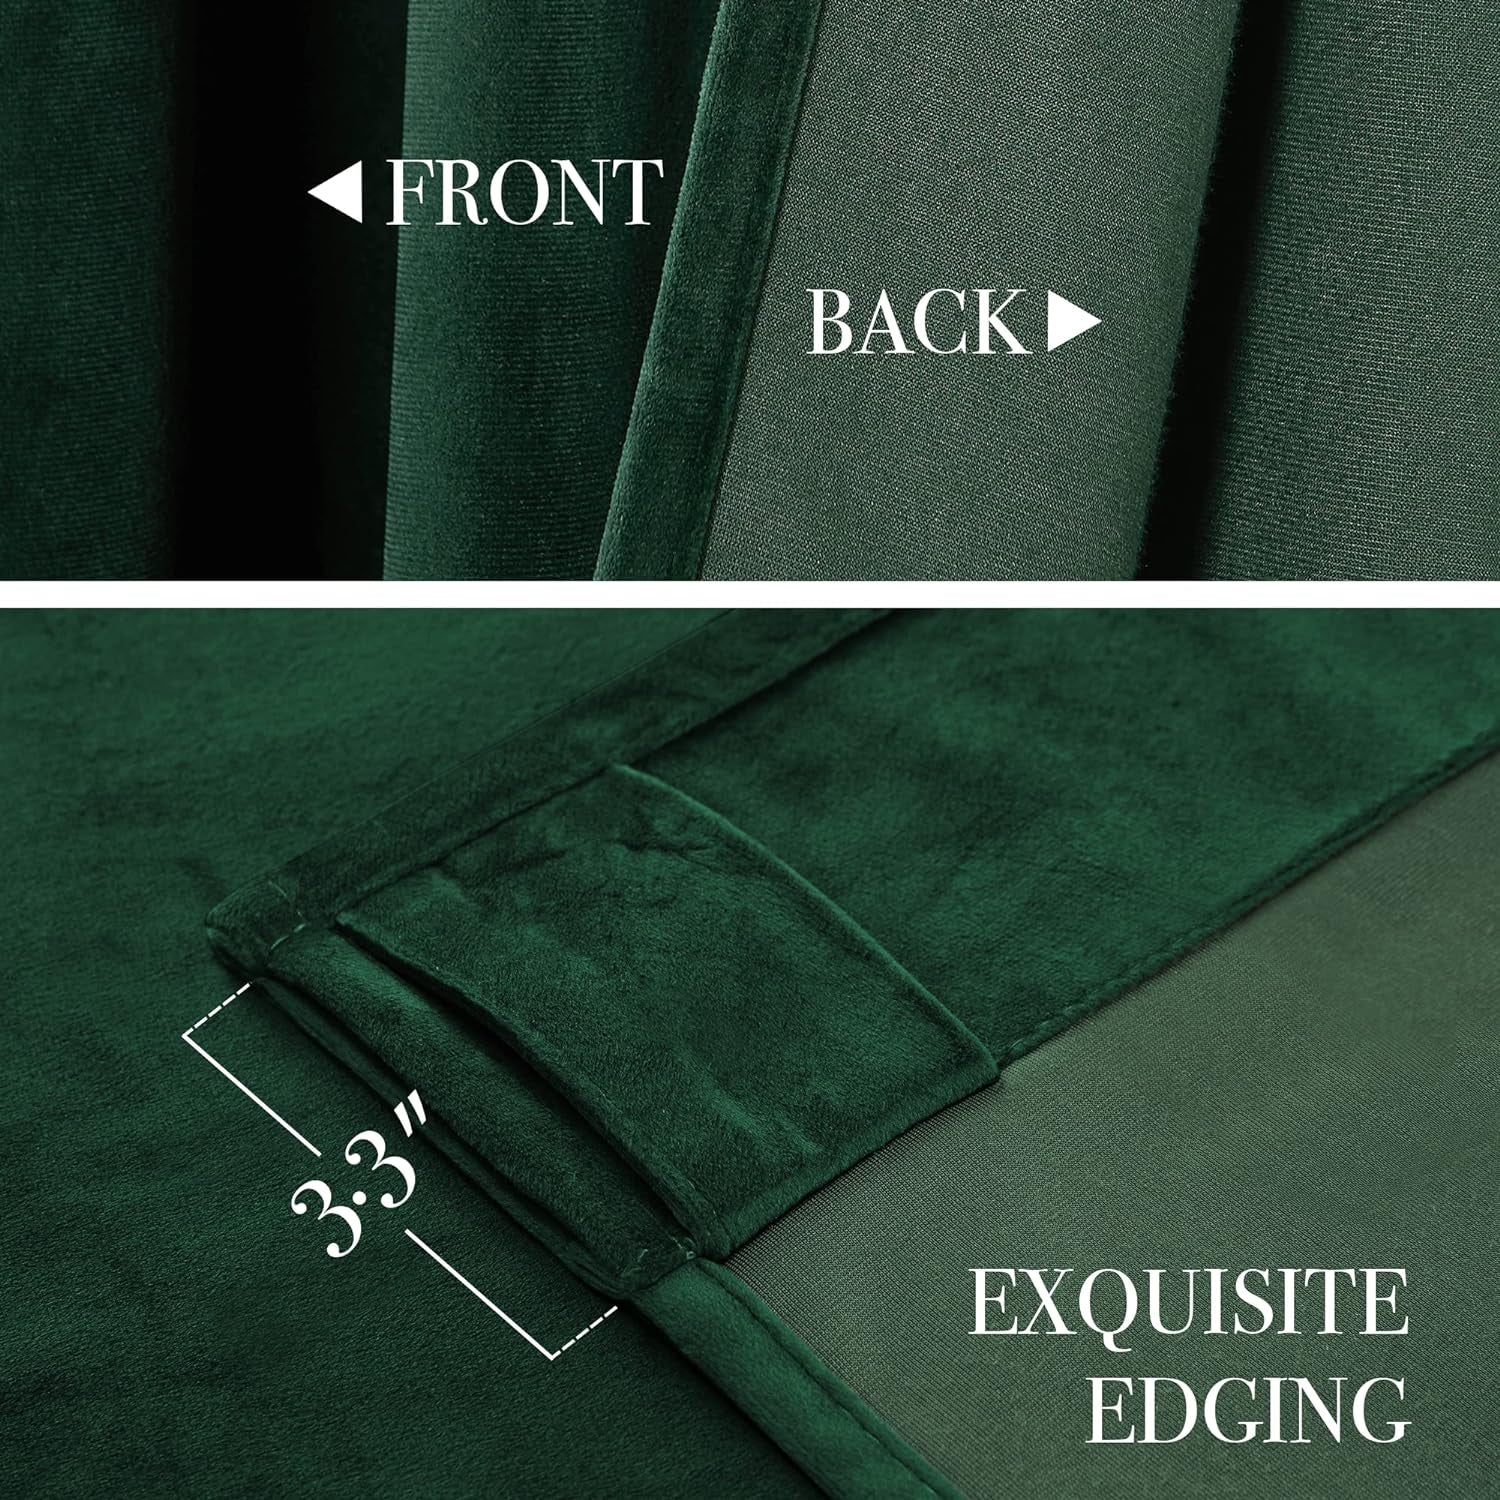 KGORGE Green Velvet Curtains 84 Inches Super Soft Room Darkening Thermal Insulating Window Curtains & Drapes for Bedroom Living Room Backdrop Holiday Christmas Decor, Hunter Green, W 52 X L 84, 2 Pcs  KGORGE   